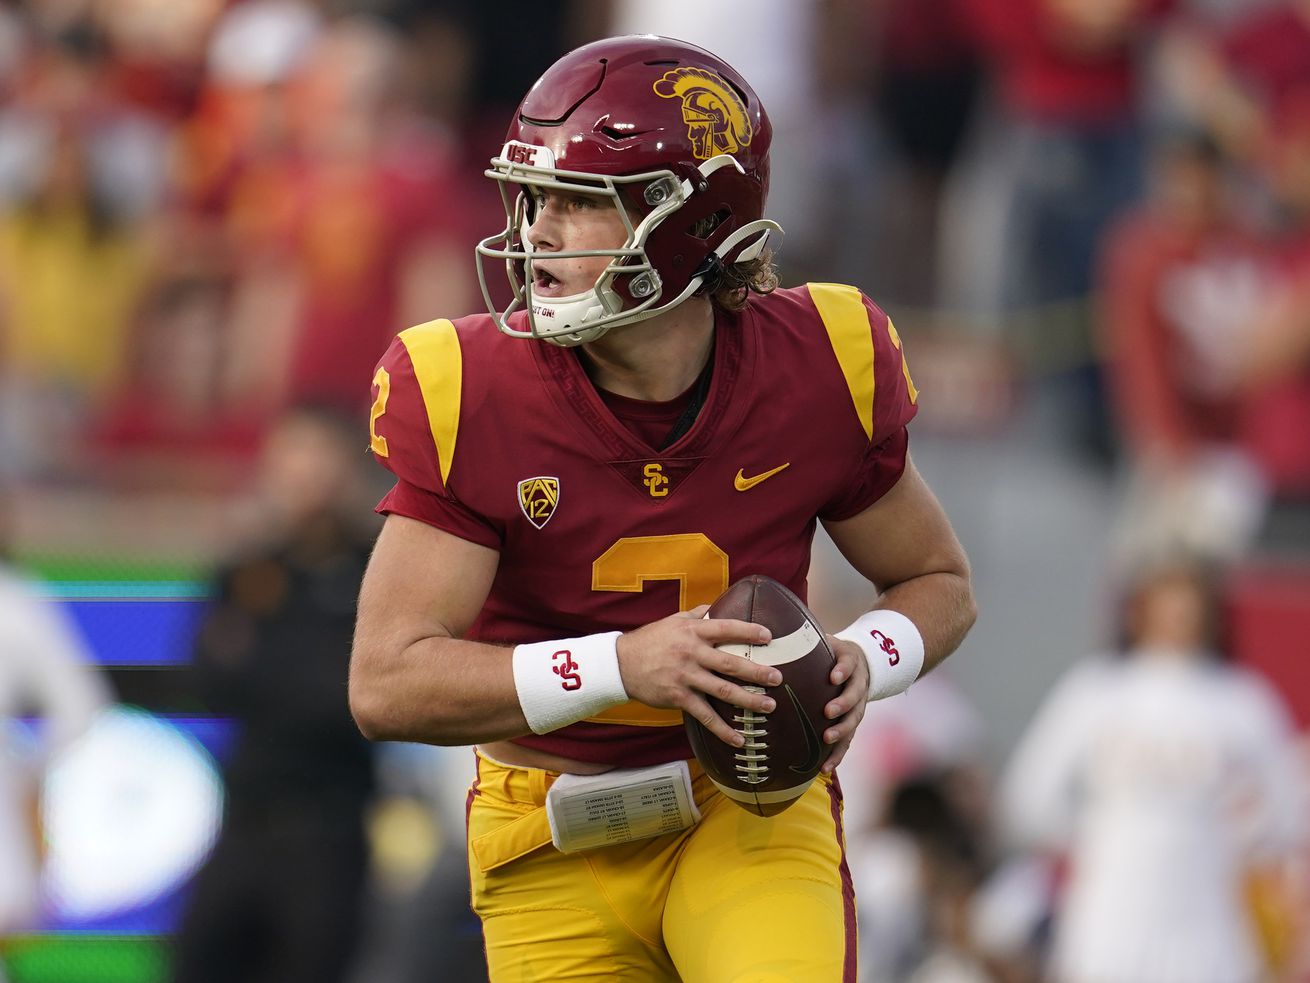 Jaxson Dart, the USC quarterback and former Utah high school standout who entered the NCAA transfer portal, is reportedly looking into Oklahoma, Ole Miss and TCU as possible transfer options.